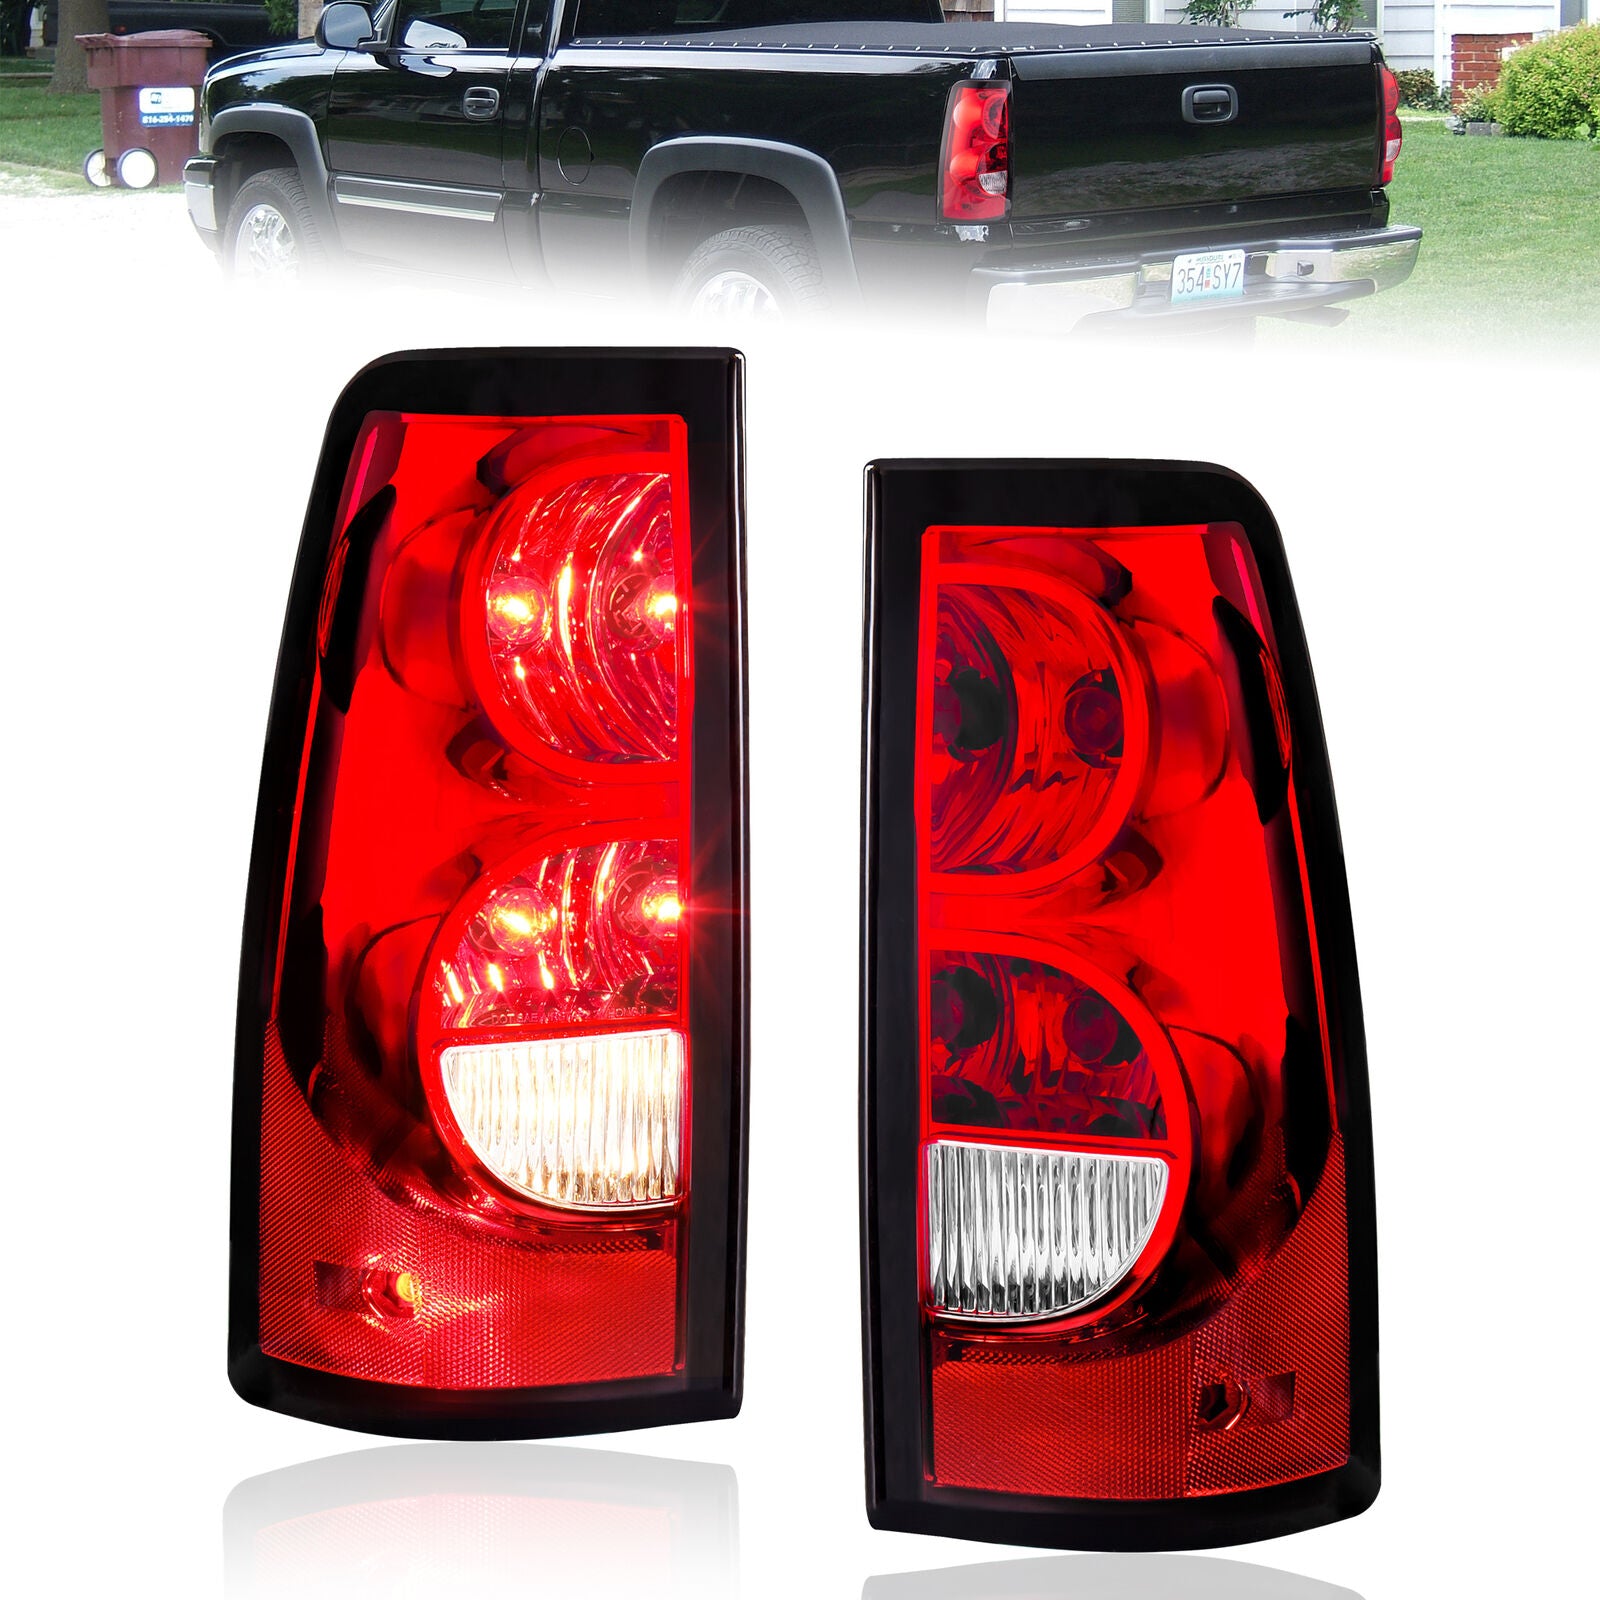 Tail Lights Rear Lamps Red Lens For 2003-2006 Chevy Silverado 1500 2500 3500 HD 2pcs